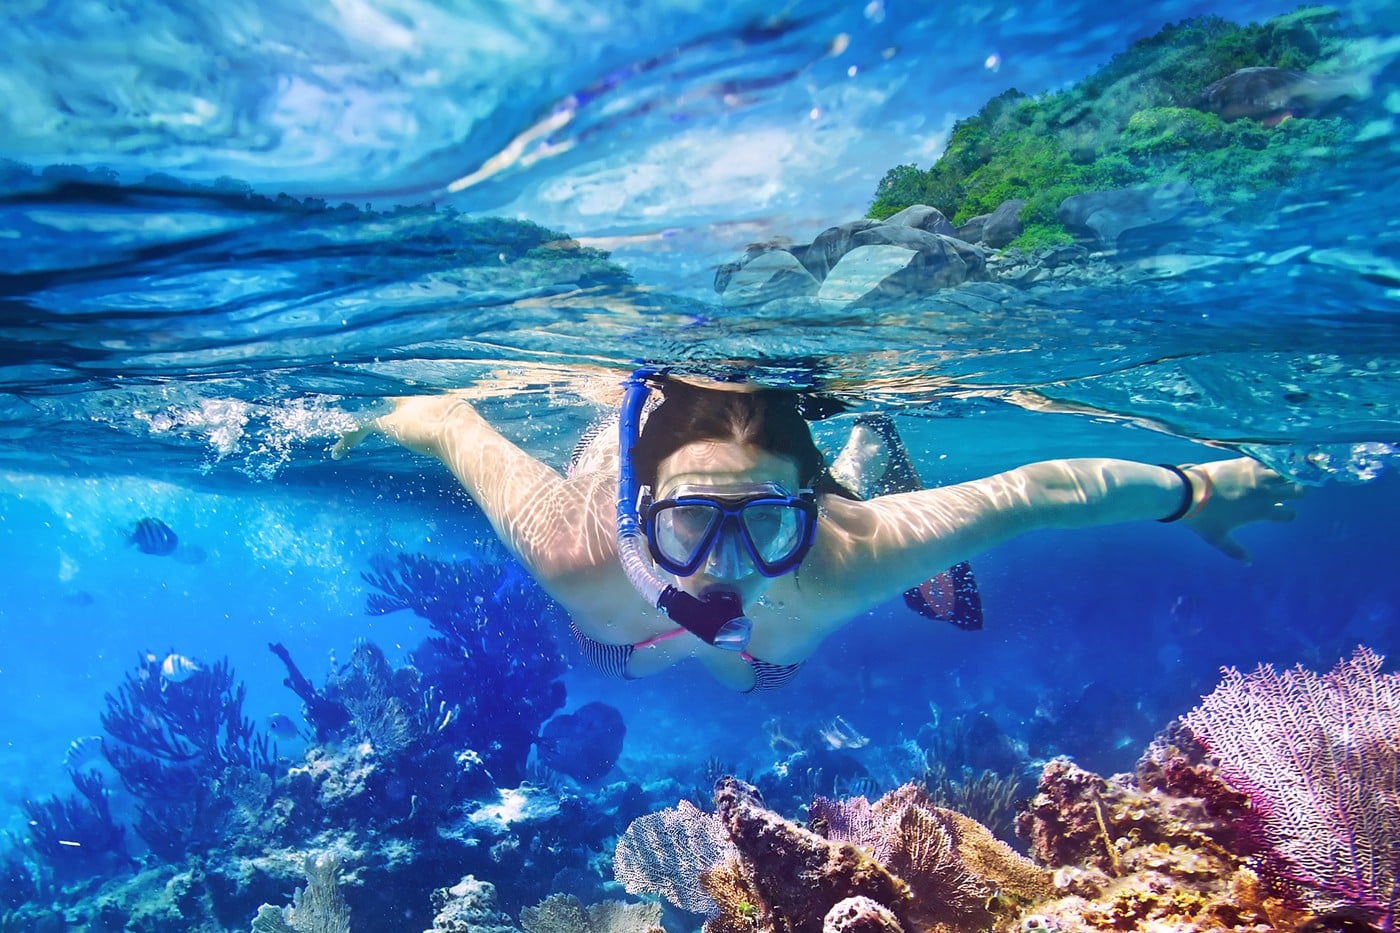  How To Snorkel Without Swallowing Water